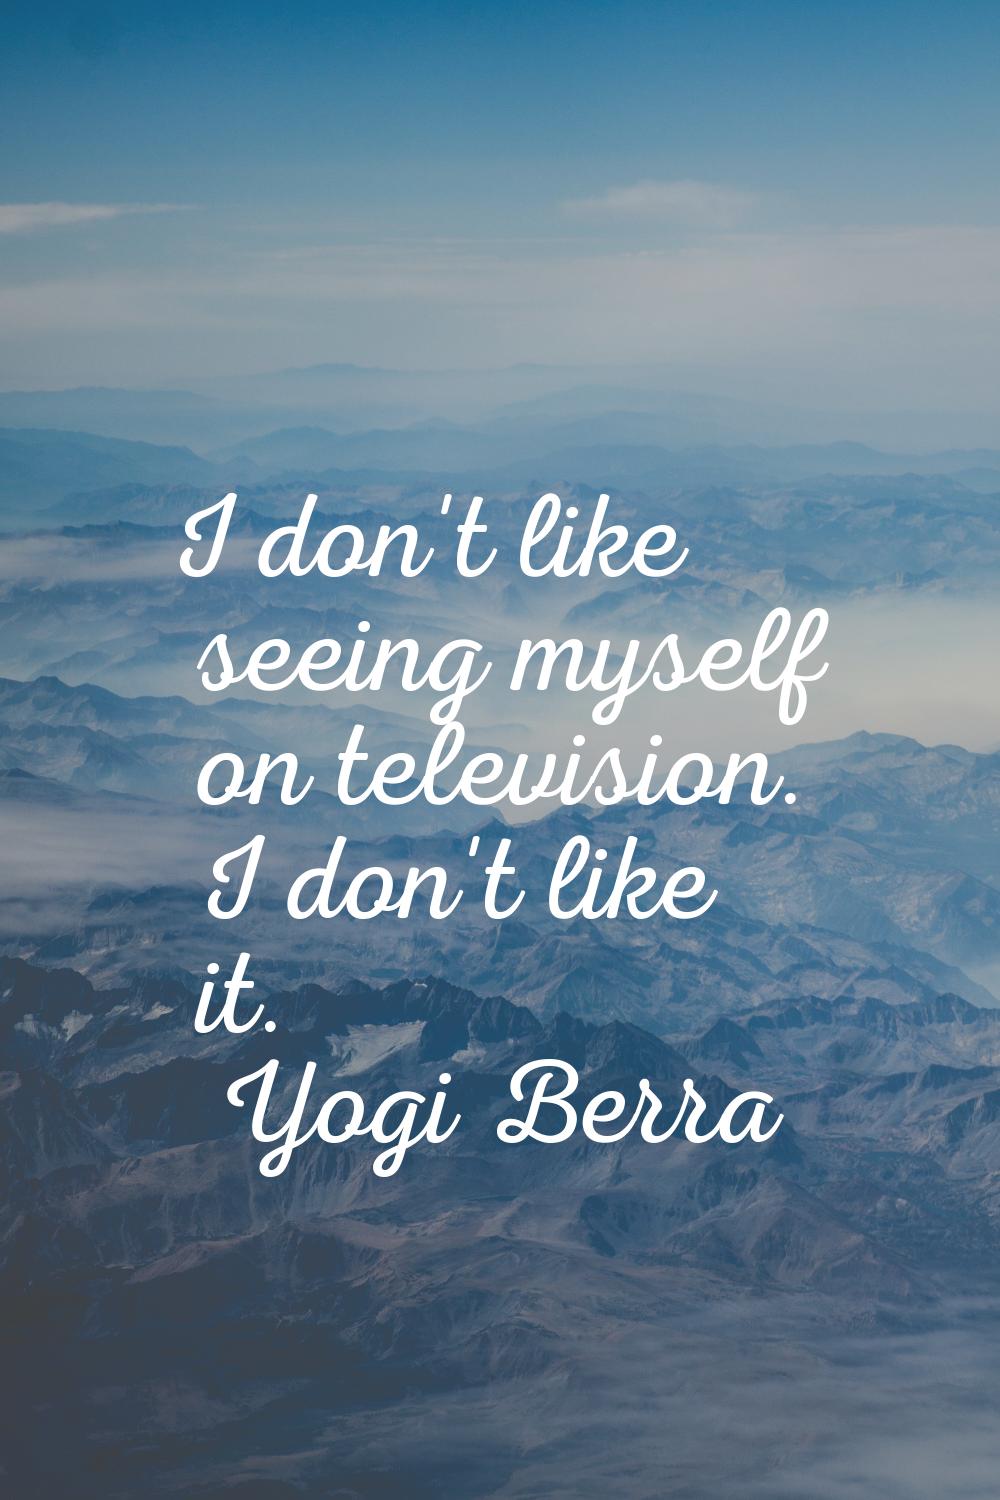 I don't like seeing myself on television. I don't like it.